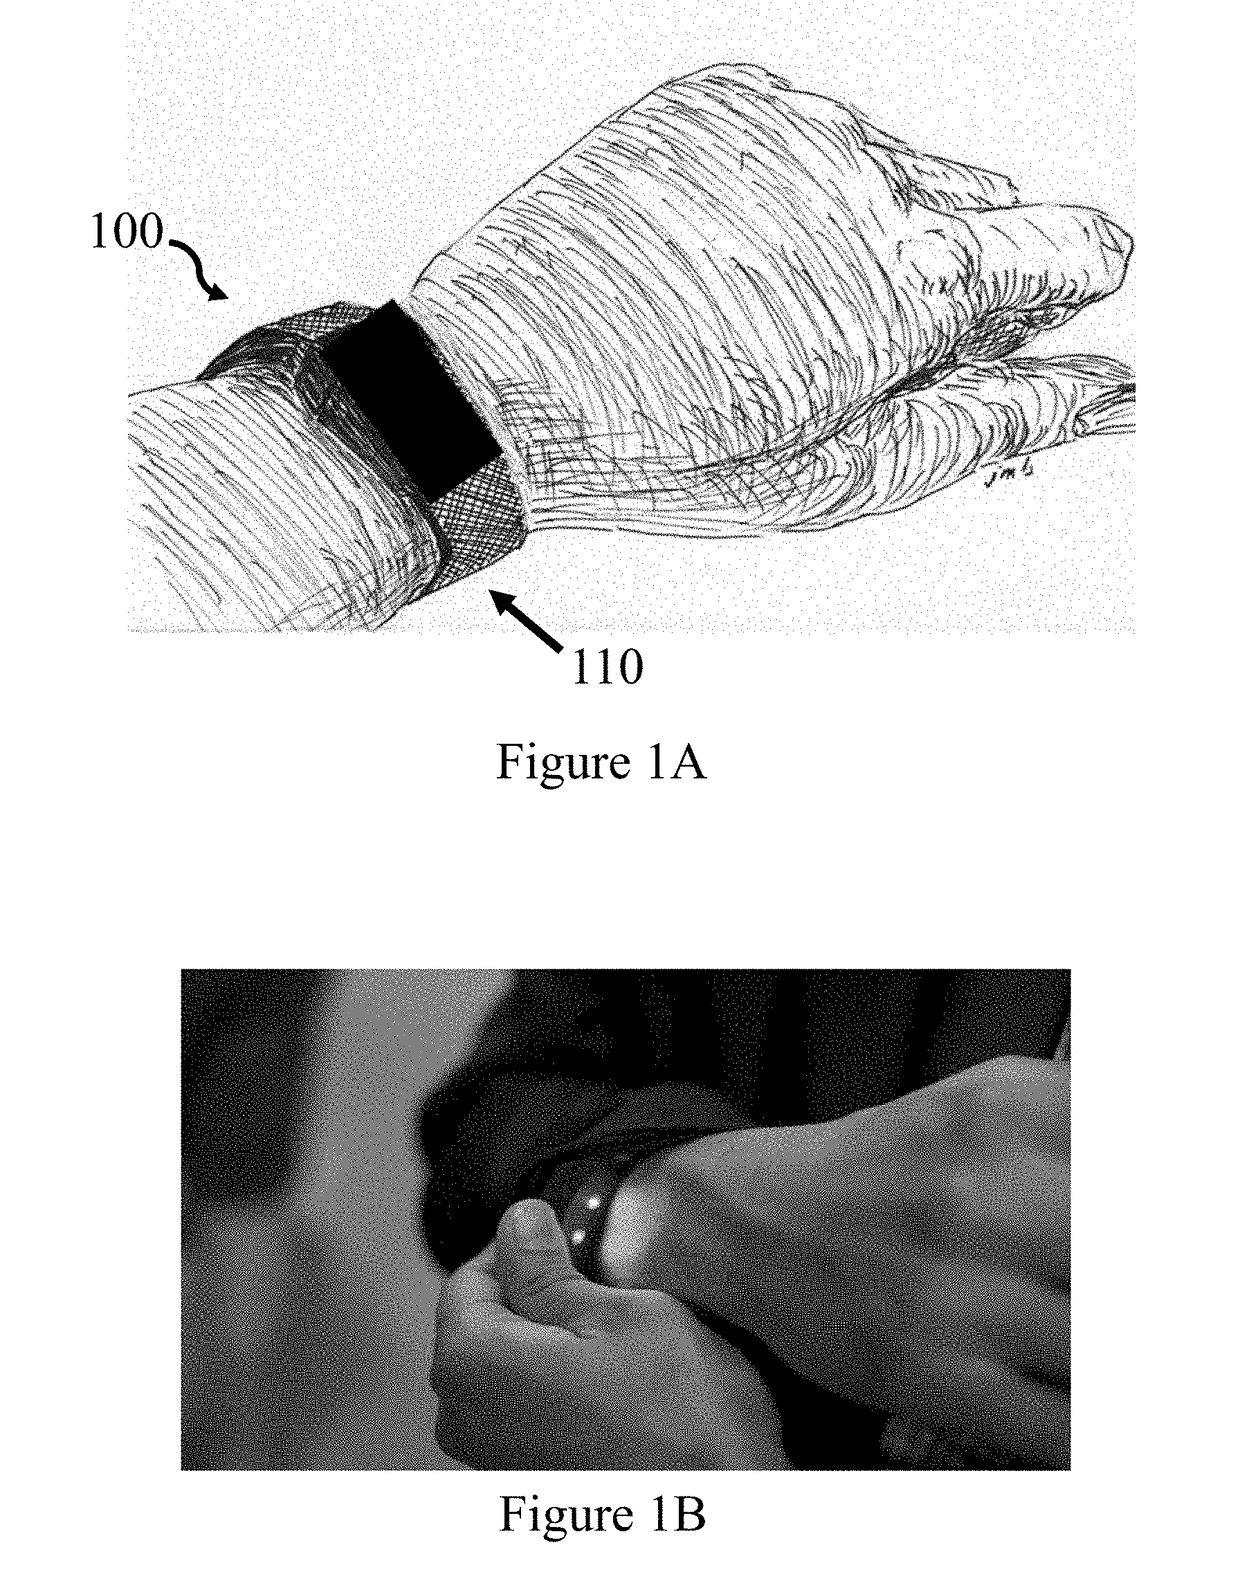 Wearable monitoring device